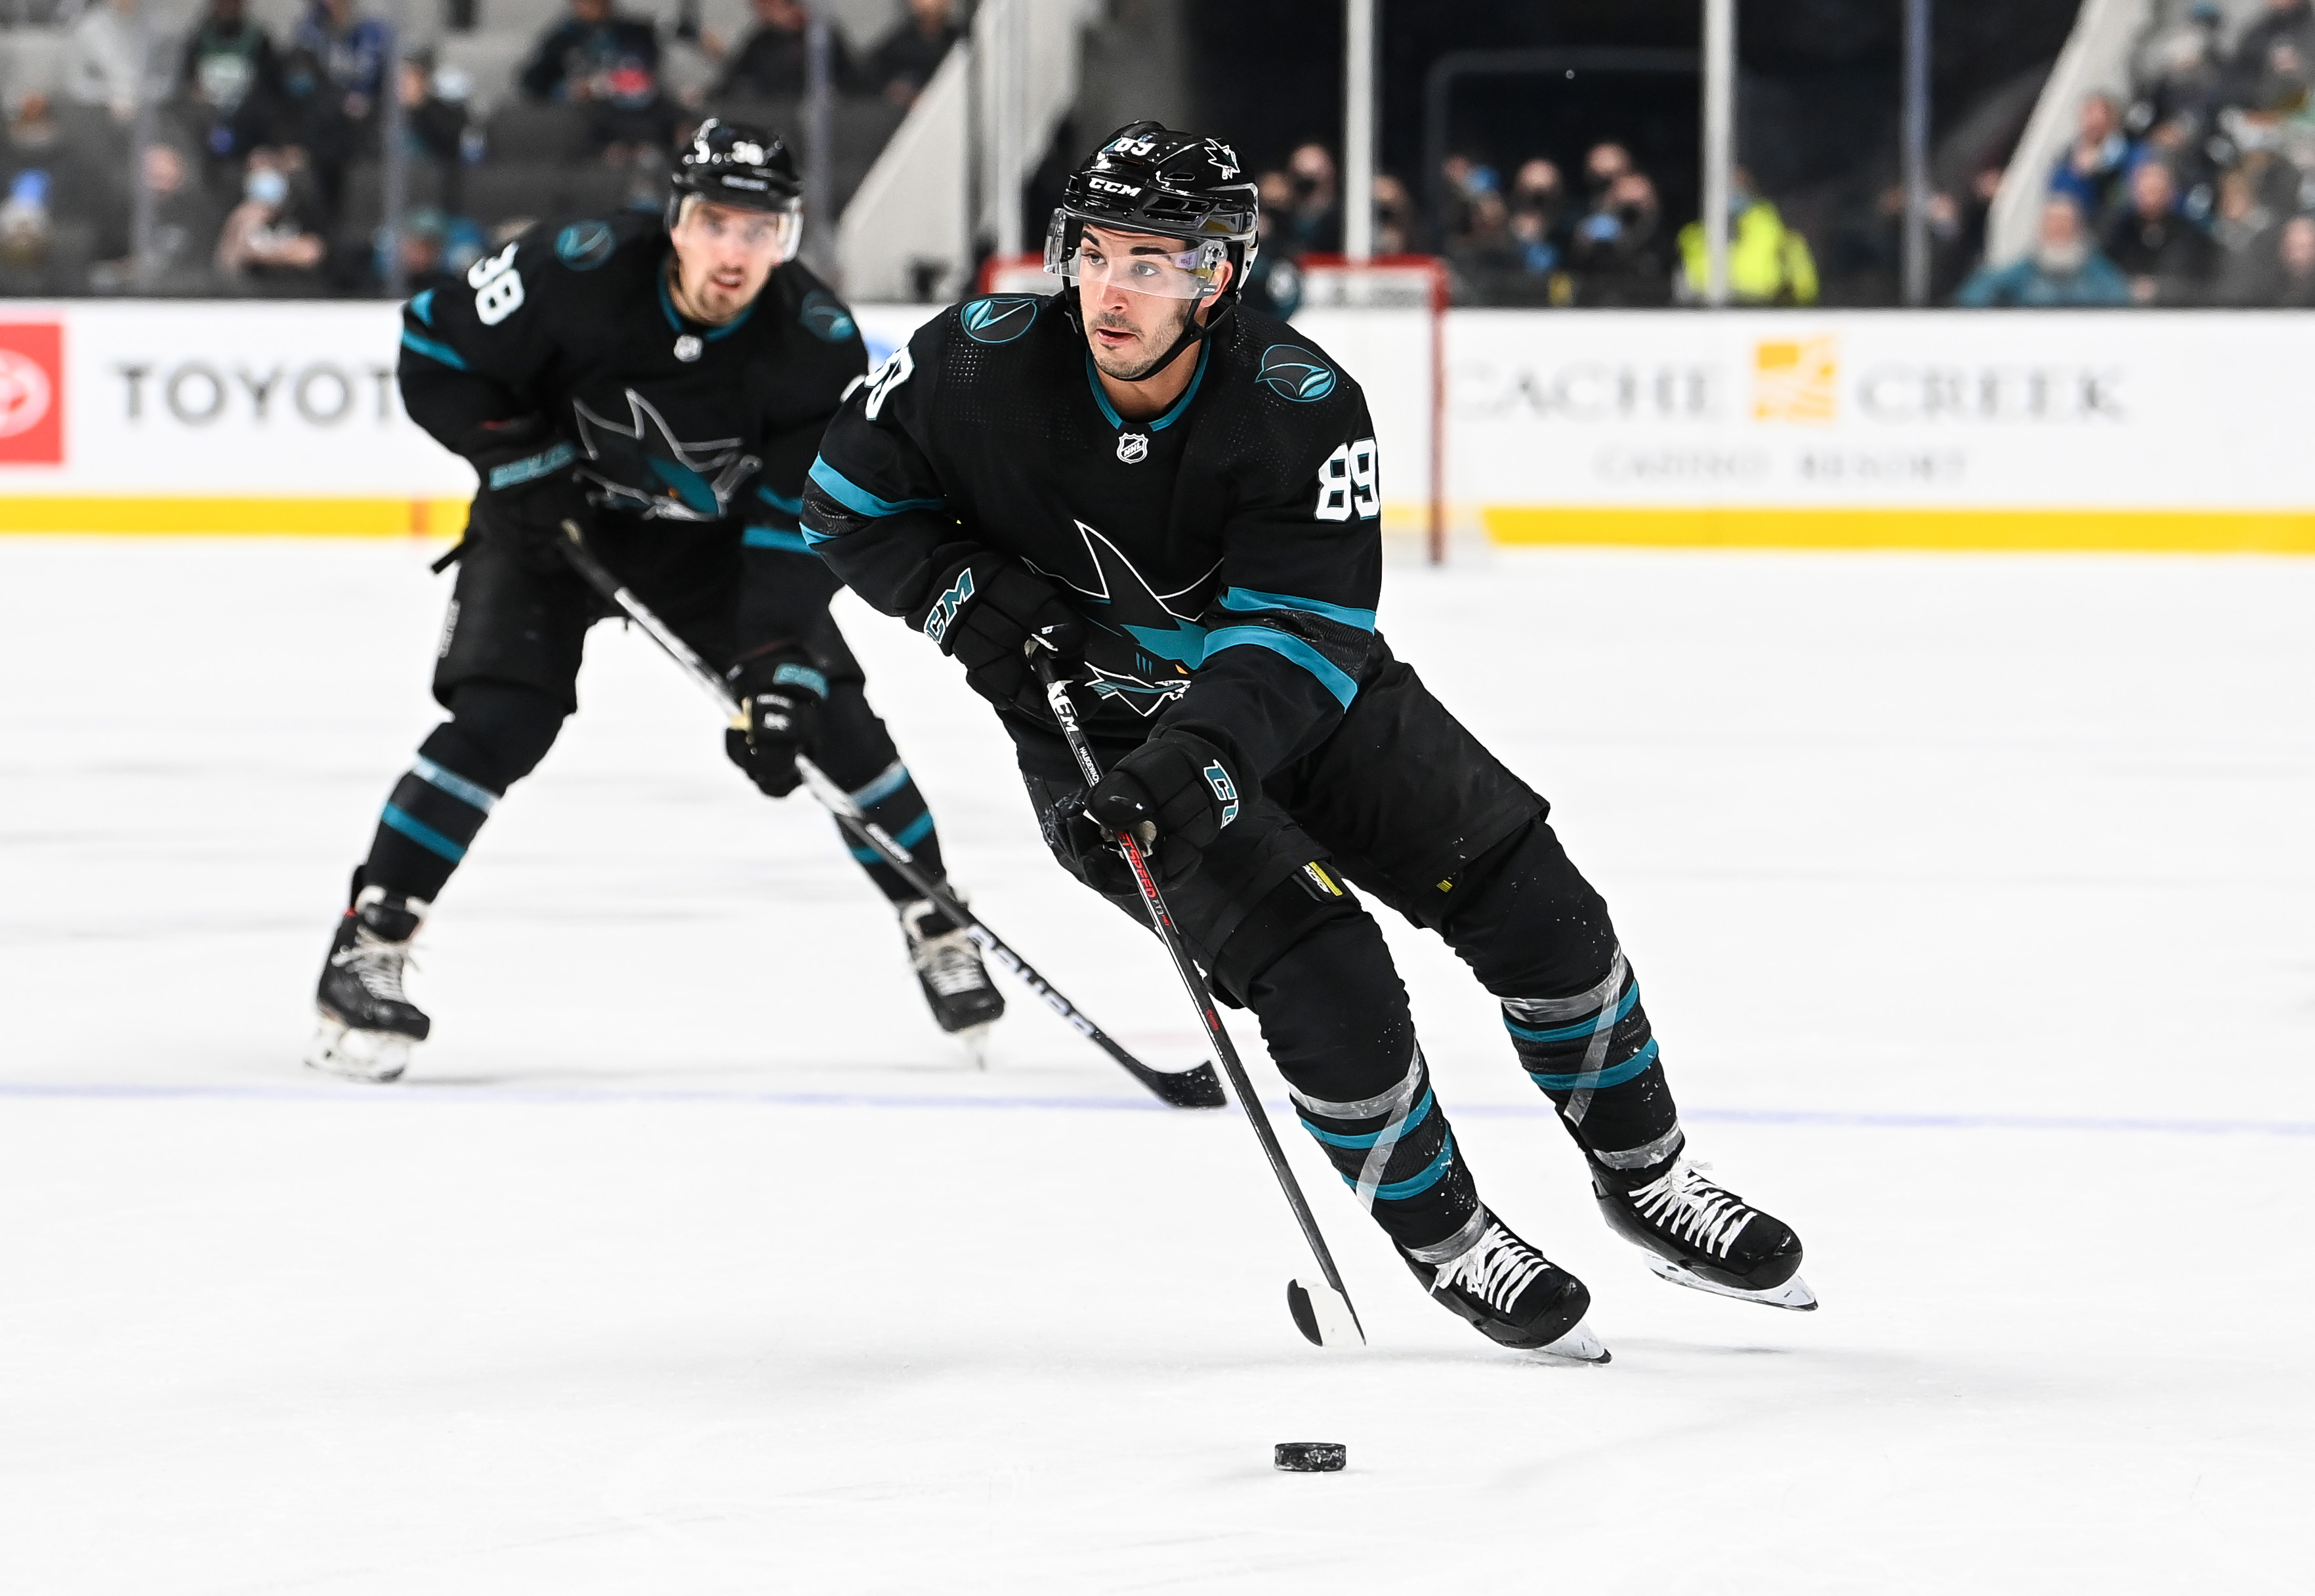 Jayden Halbgewachs #89 of the San Jose Sharks skates ahead with the puck against the Vancouver Canucks in a regular season game at SAP Center on December 16, 2021 in San Jose, California.